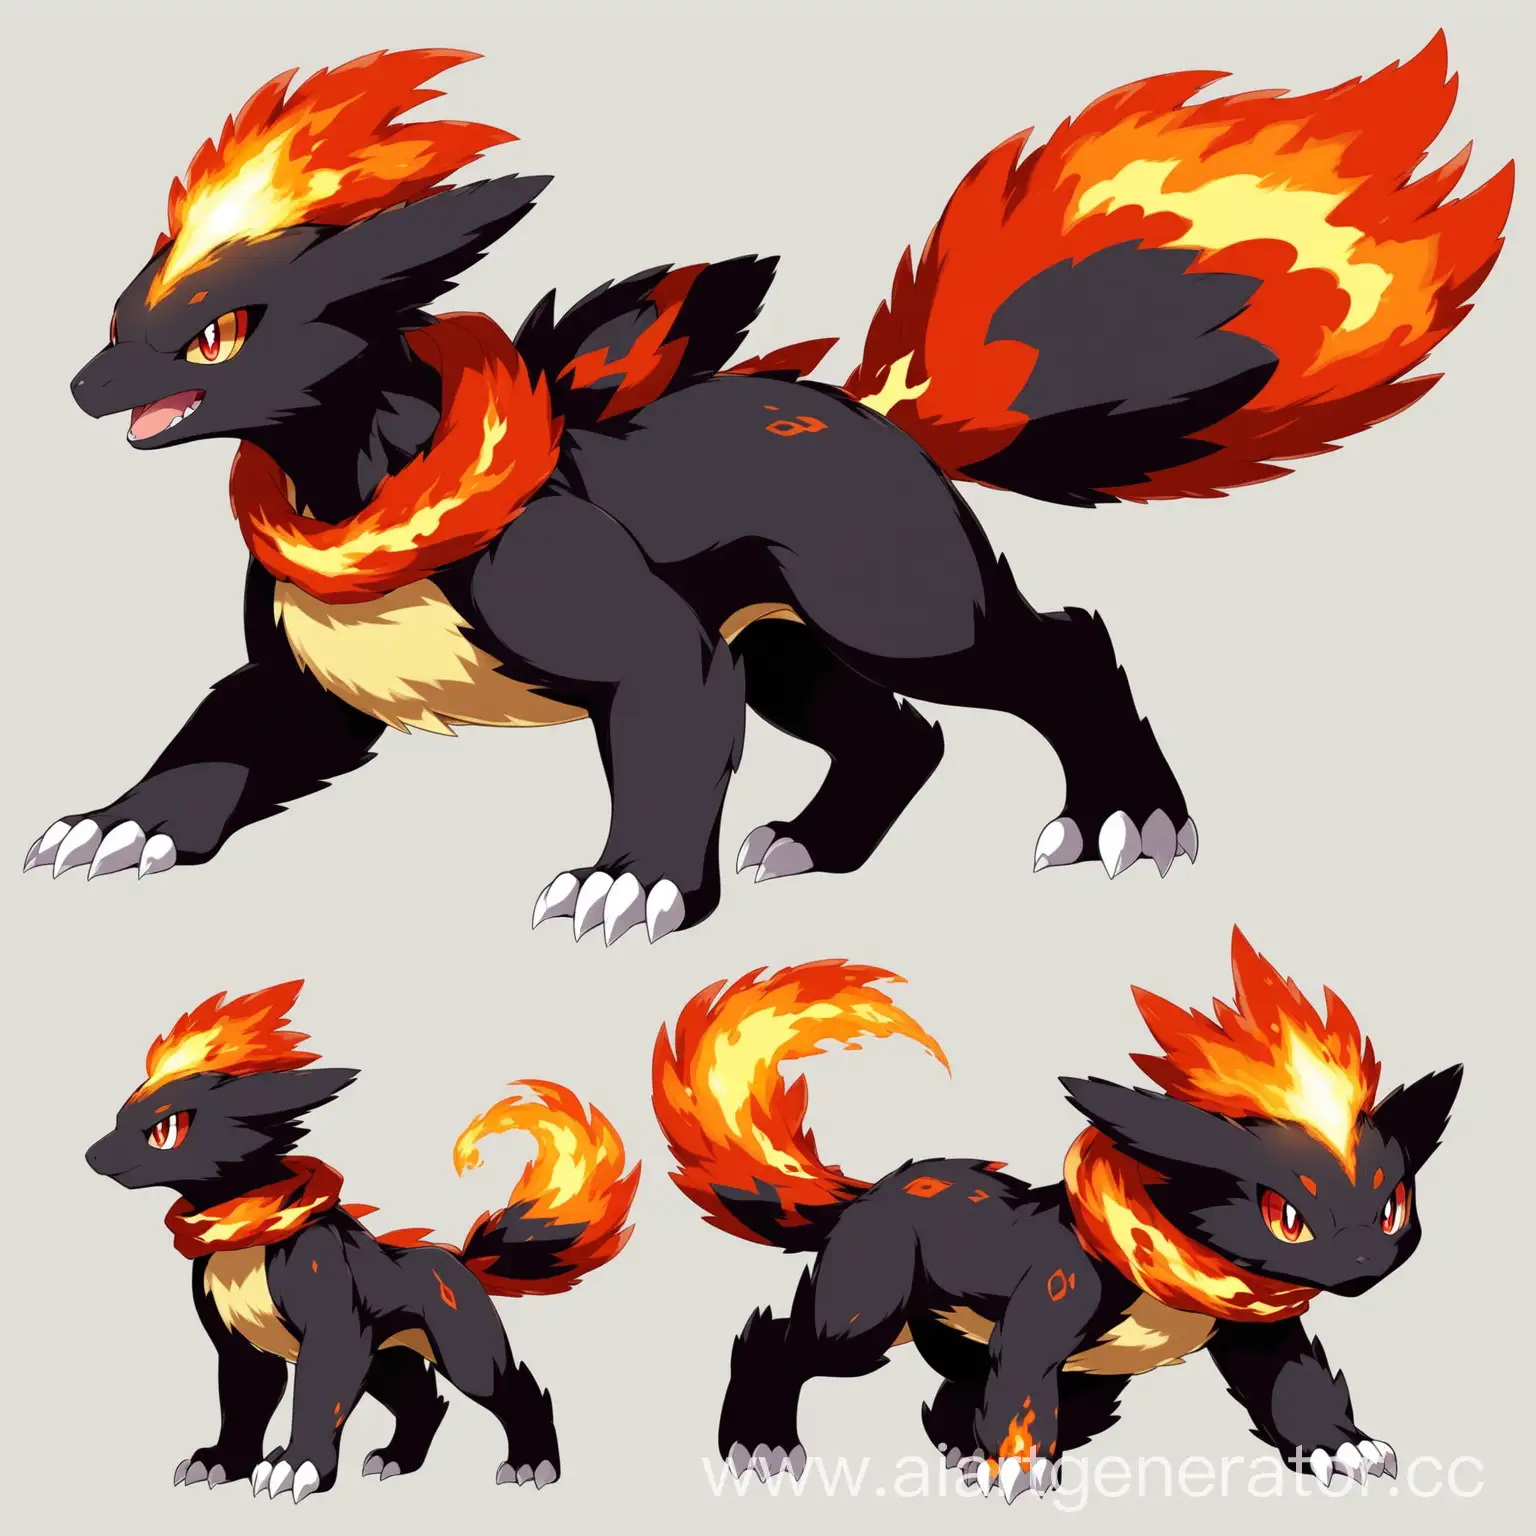 create the evolution of this Pokemon now this Pokemon has a fire type added now it has become taller than a human, it has become more closed, its scarf has become longer, it has black fur